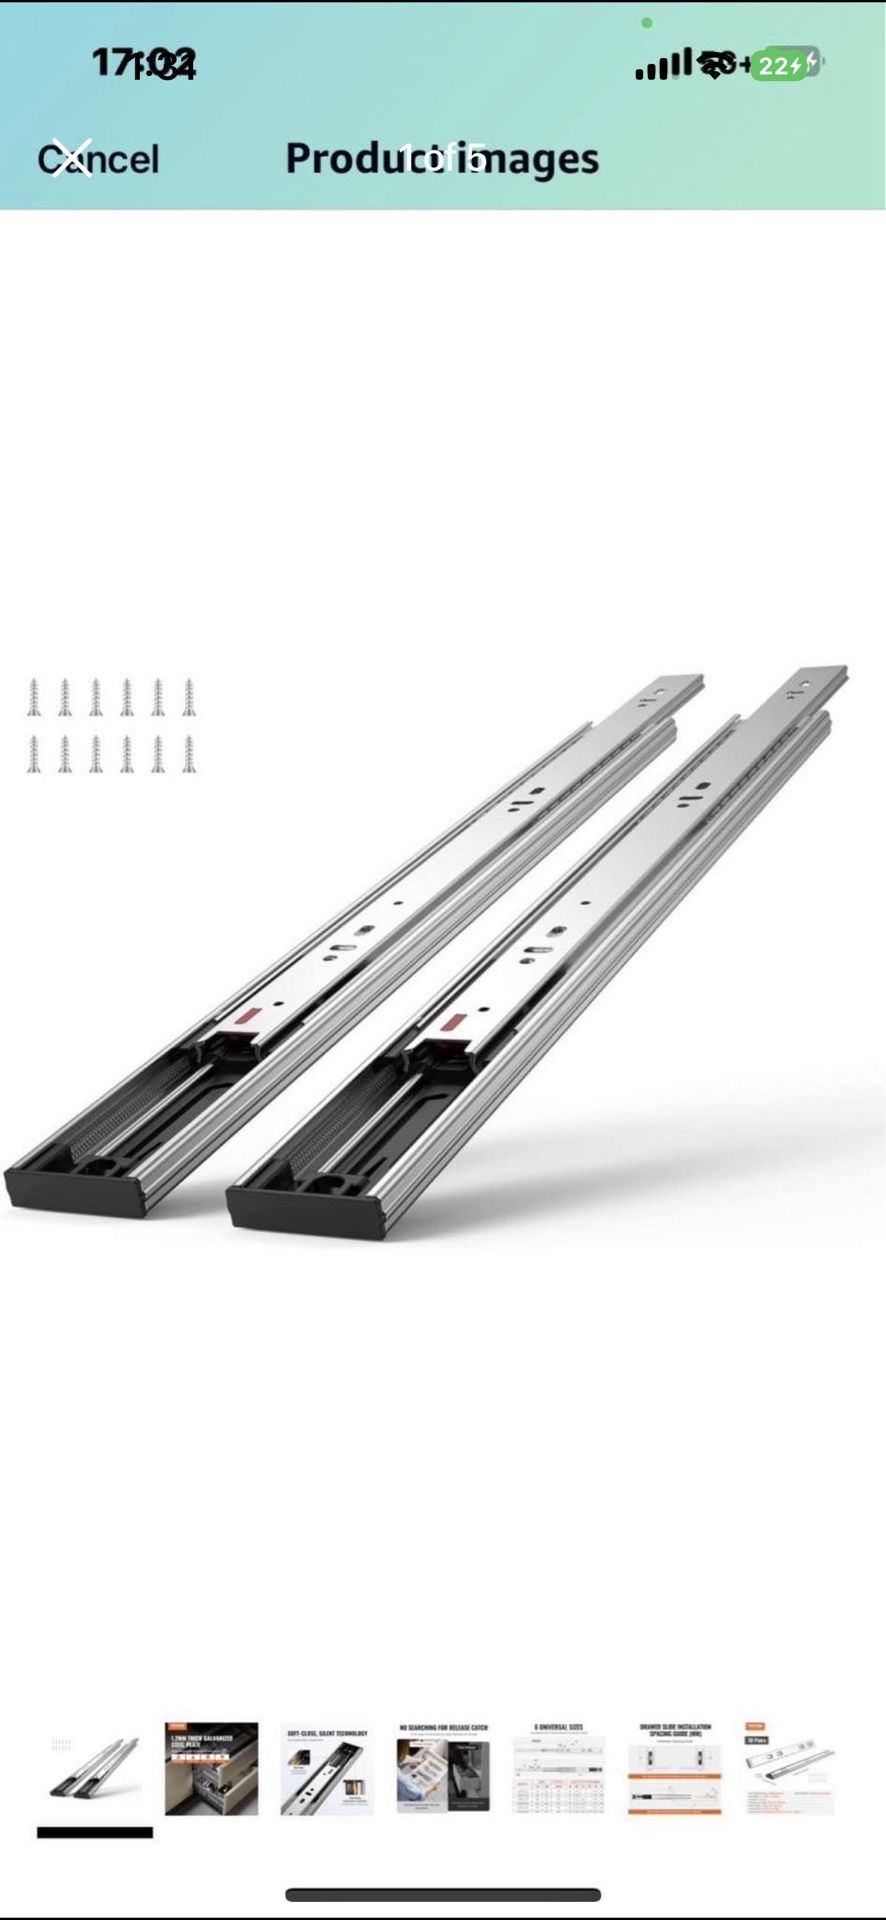 VEVOR 10 Pairs of 20 Inch Drawer Slides Side Mount Rails, Heavy Duty Full Extension Steel Track, Soft-Close Noiseless Guide Glides Cabinet Kitch